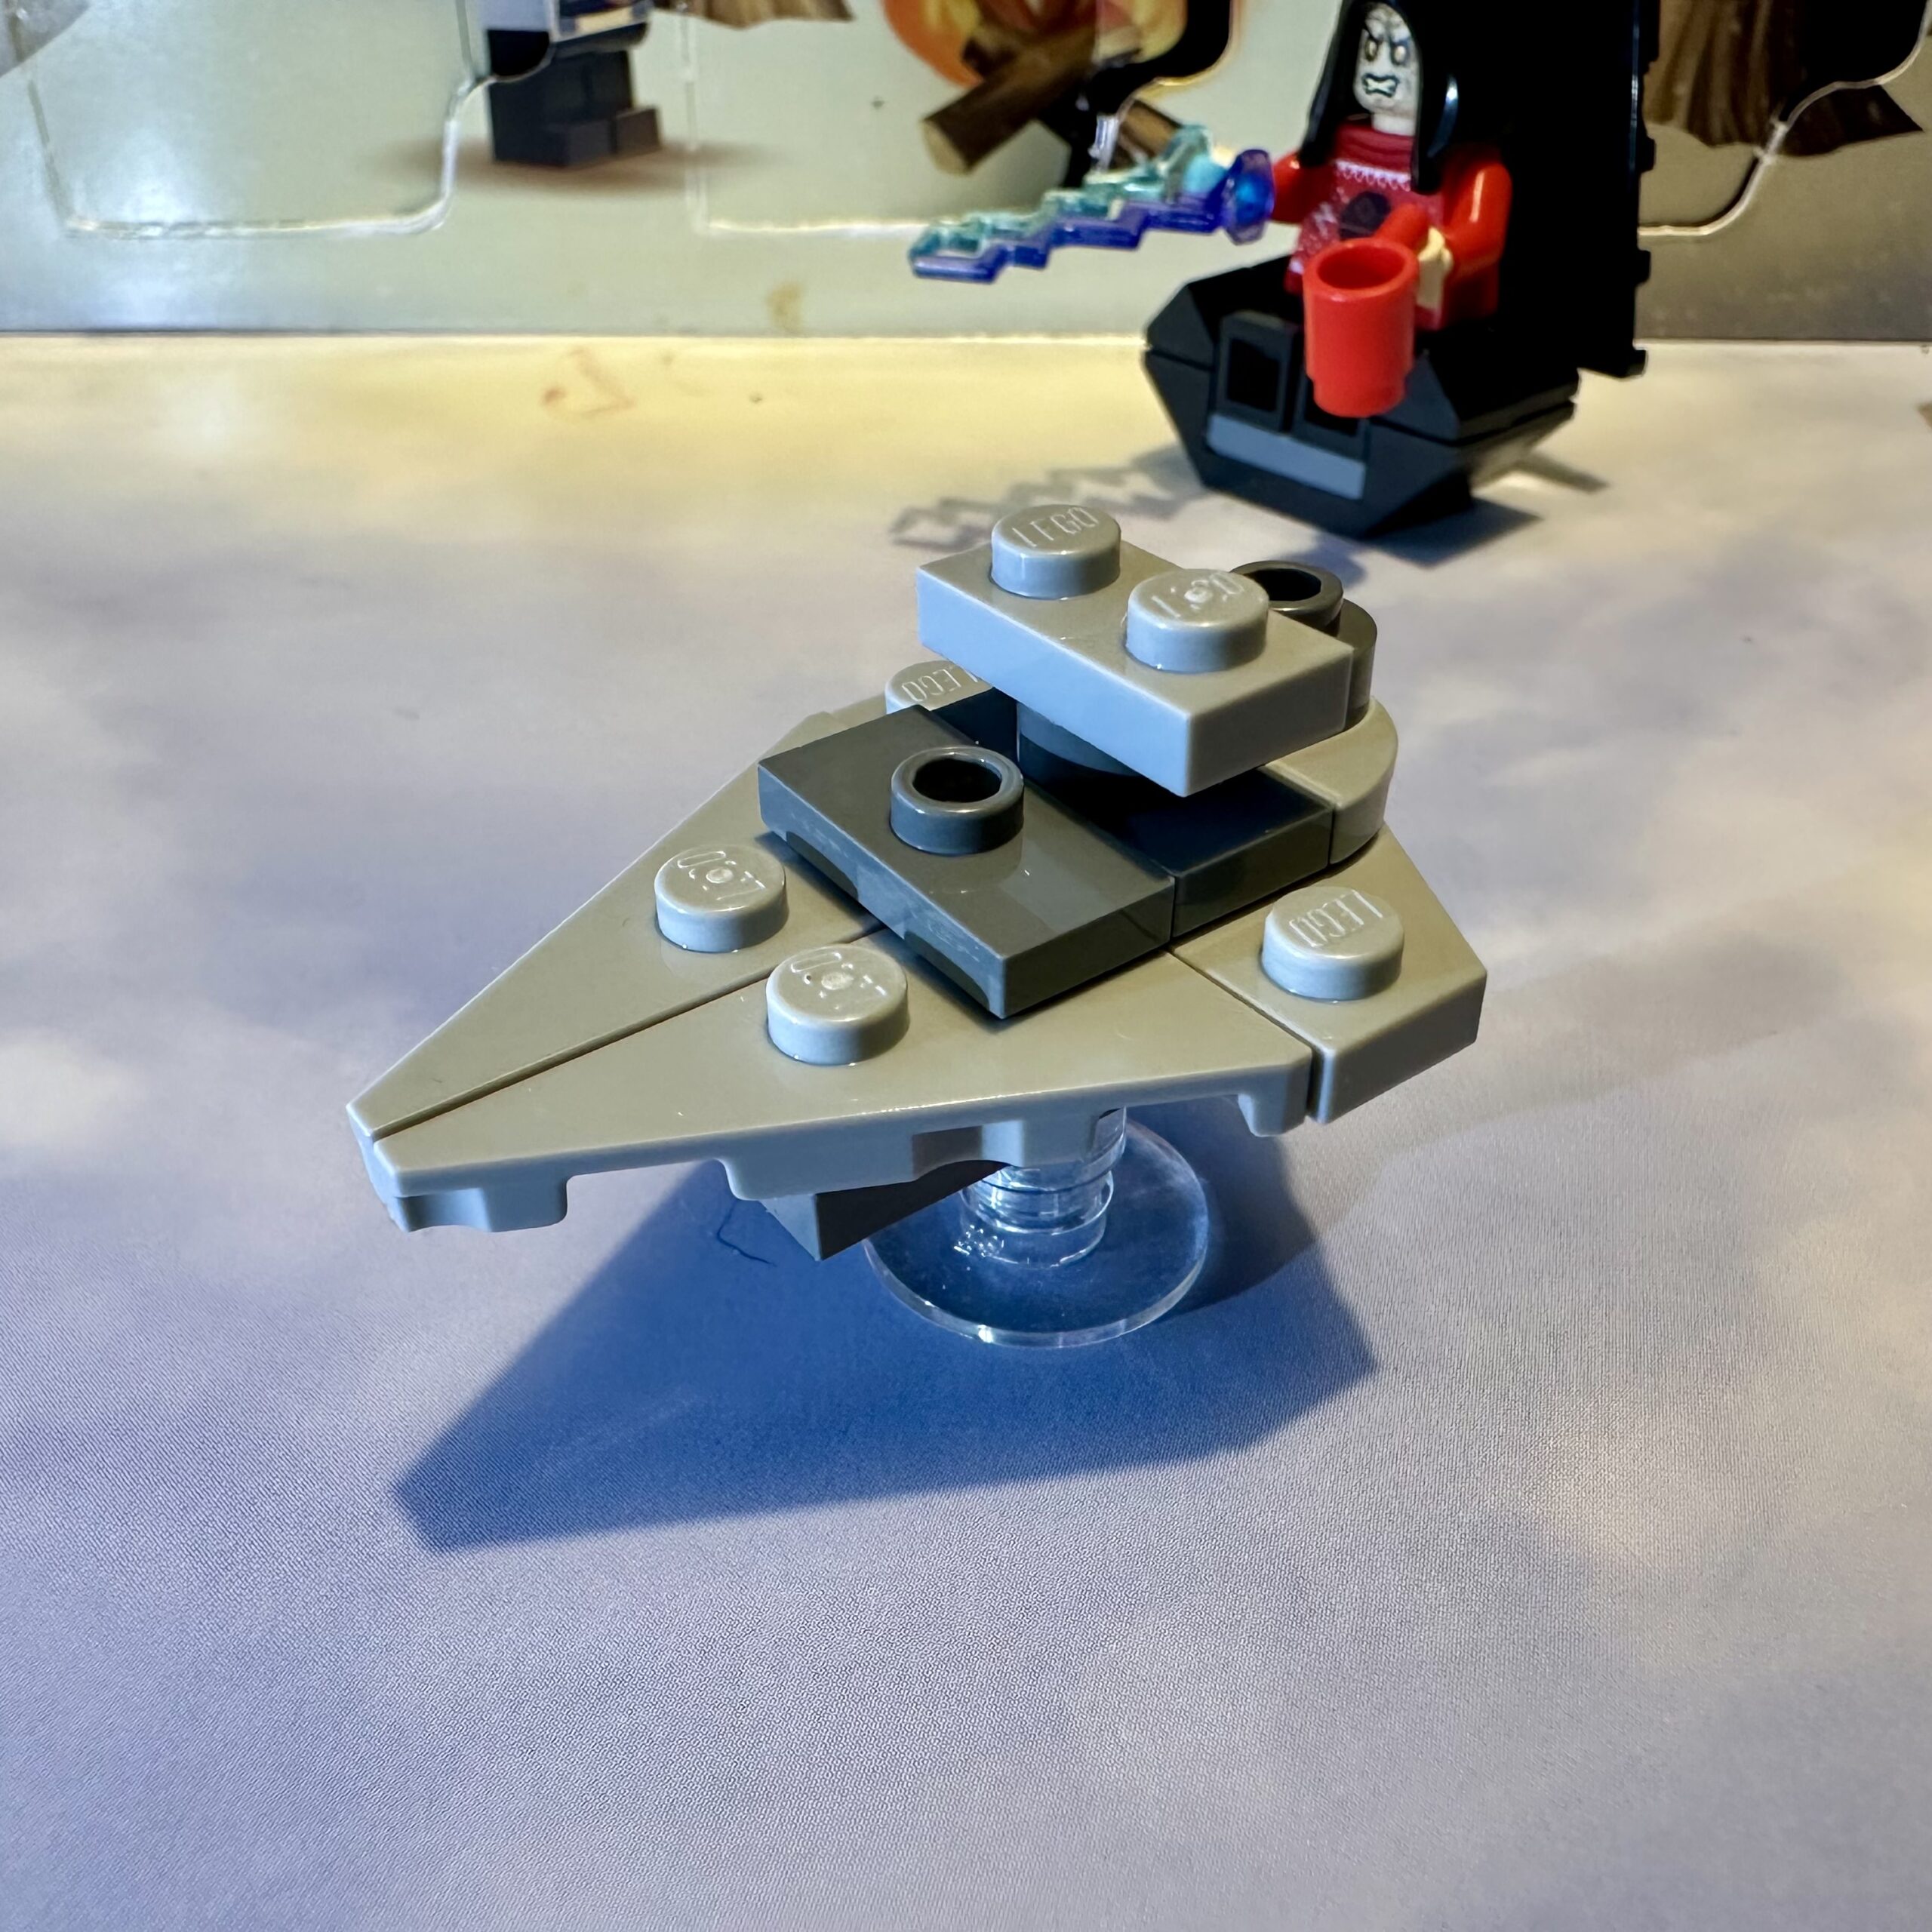 LEGO micro build of an Imperial Star Destroyer in light gray with dark gray highlights. The 2023 has the classic triangular wedge shape and raised bridge tower, but it lacks engines.